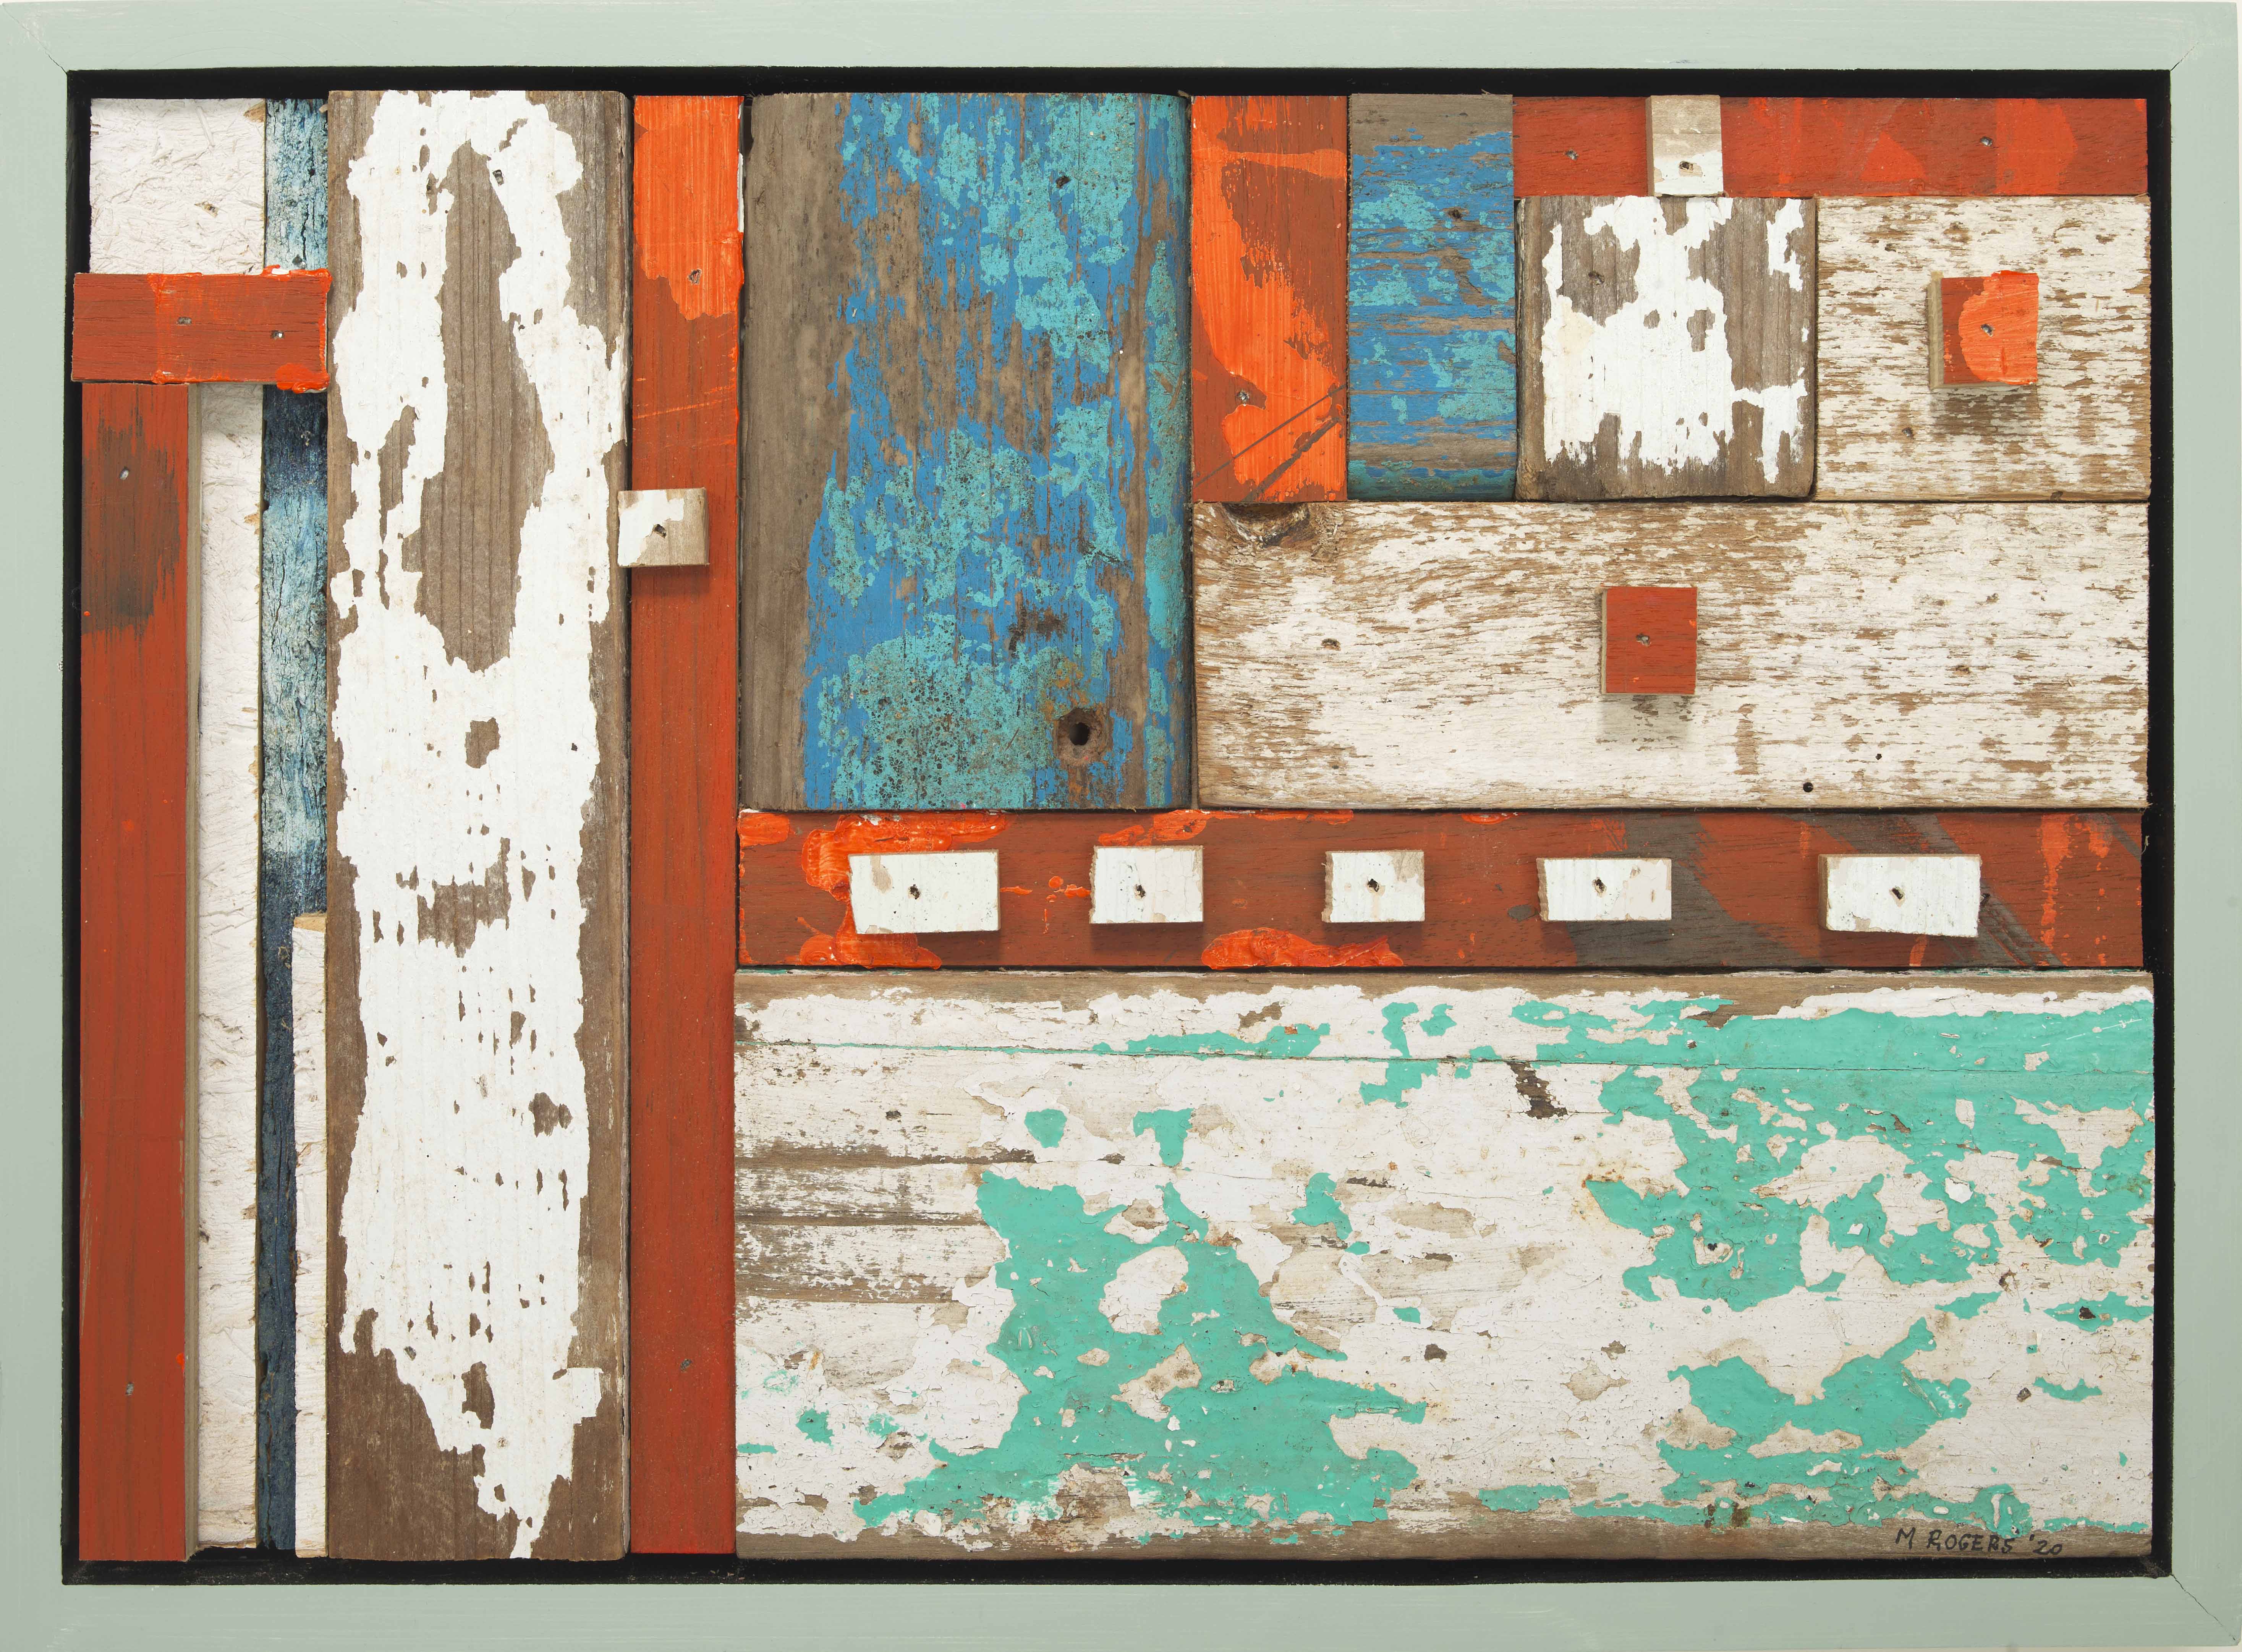 Mac Rogers, Weathered Paint, 2020, mixed media, 11 x 15 inches